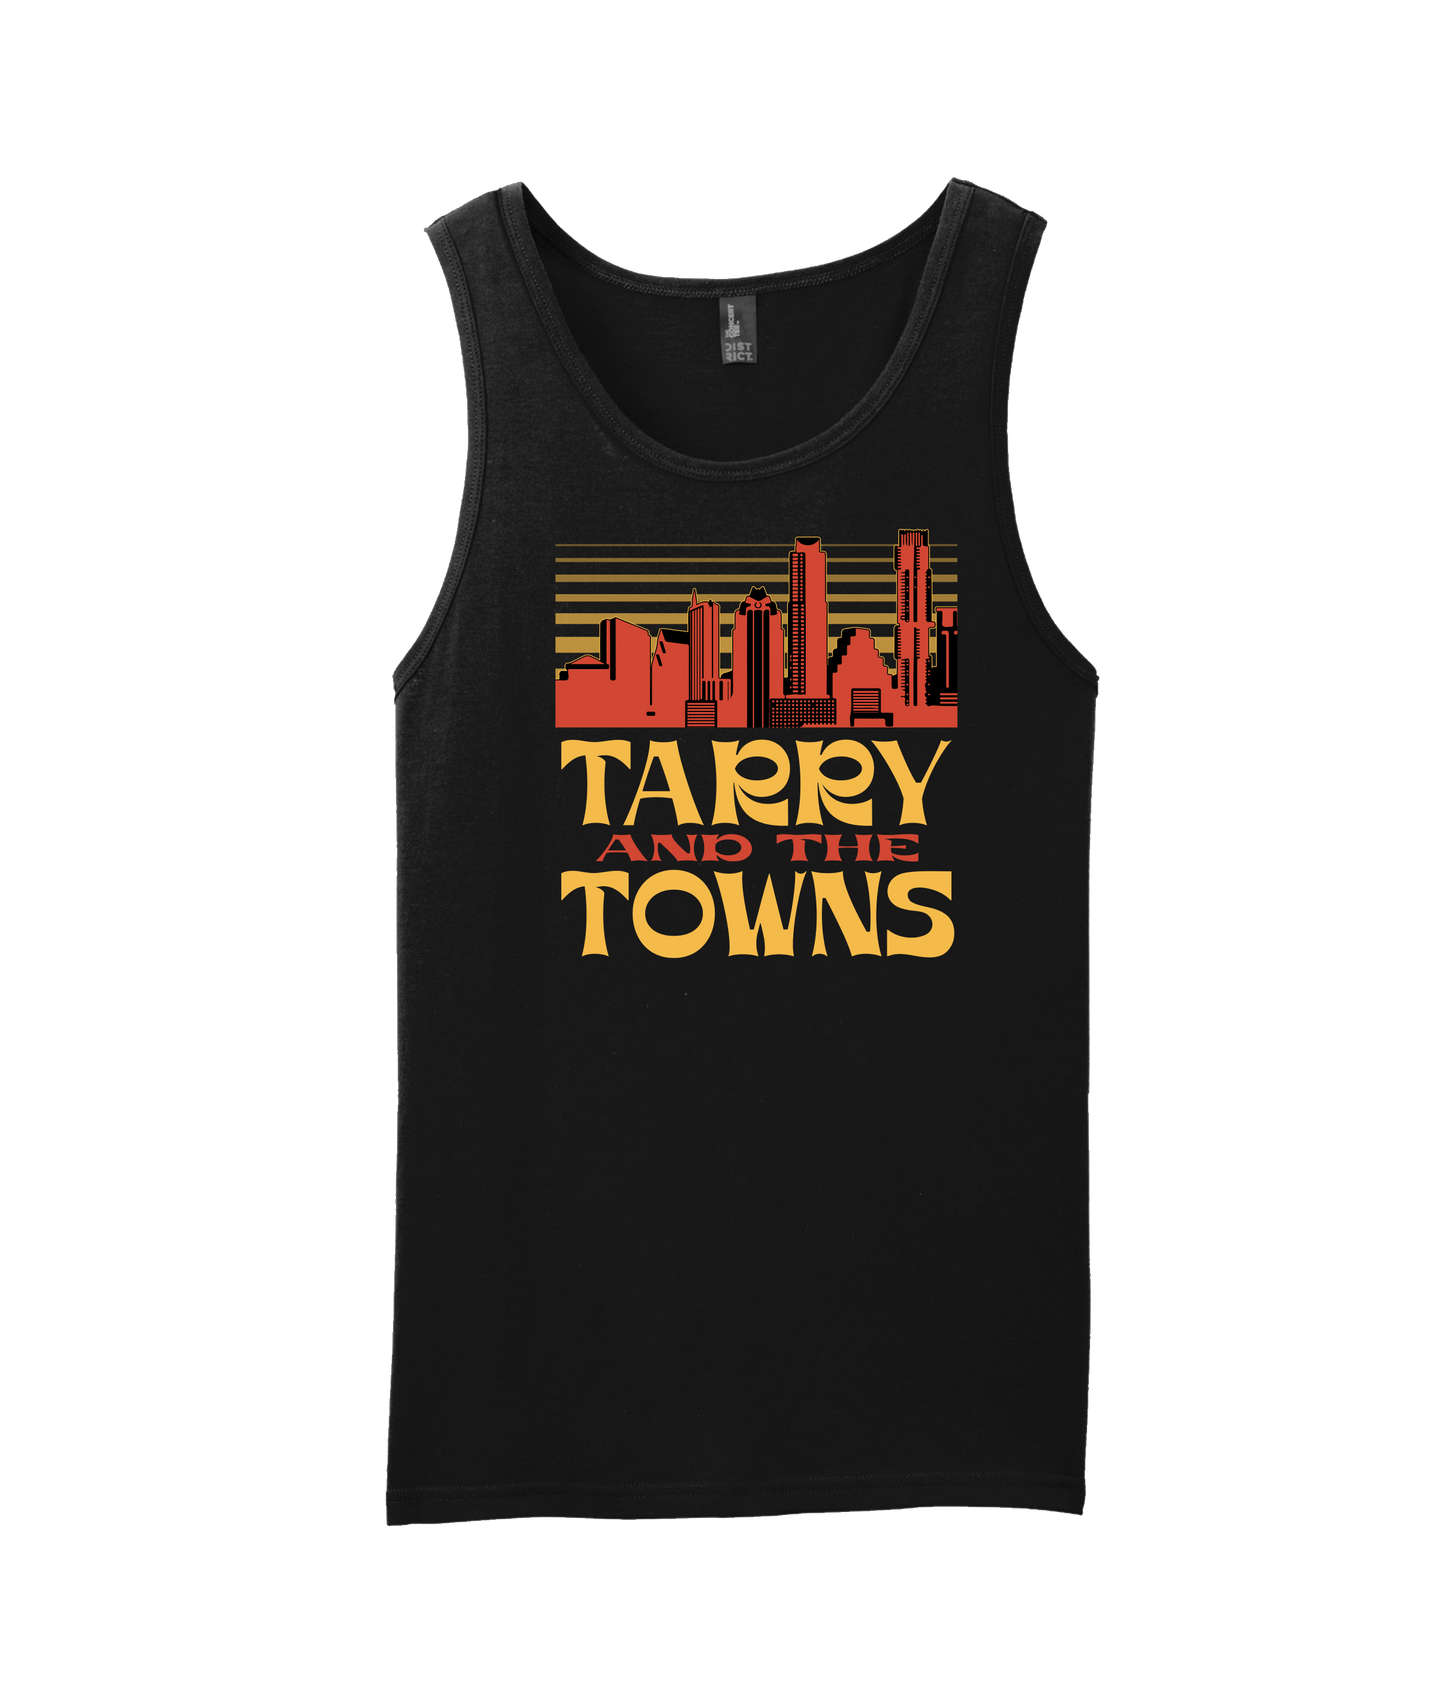 Tarry and the Towns - The 70's - Black Tank Top